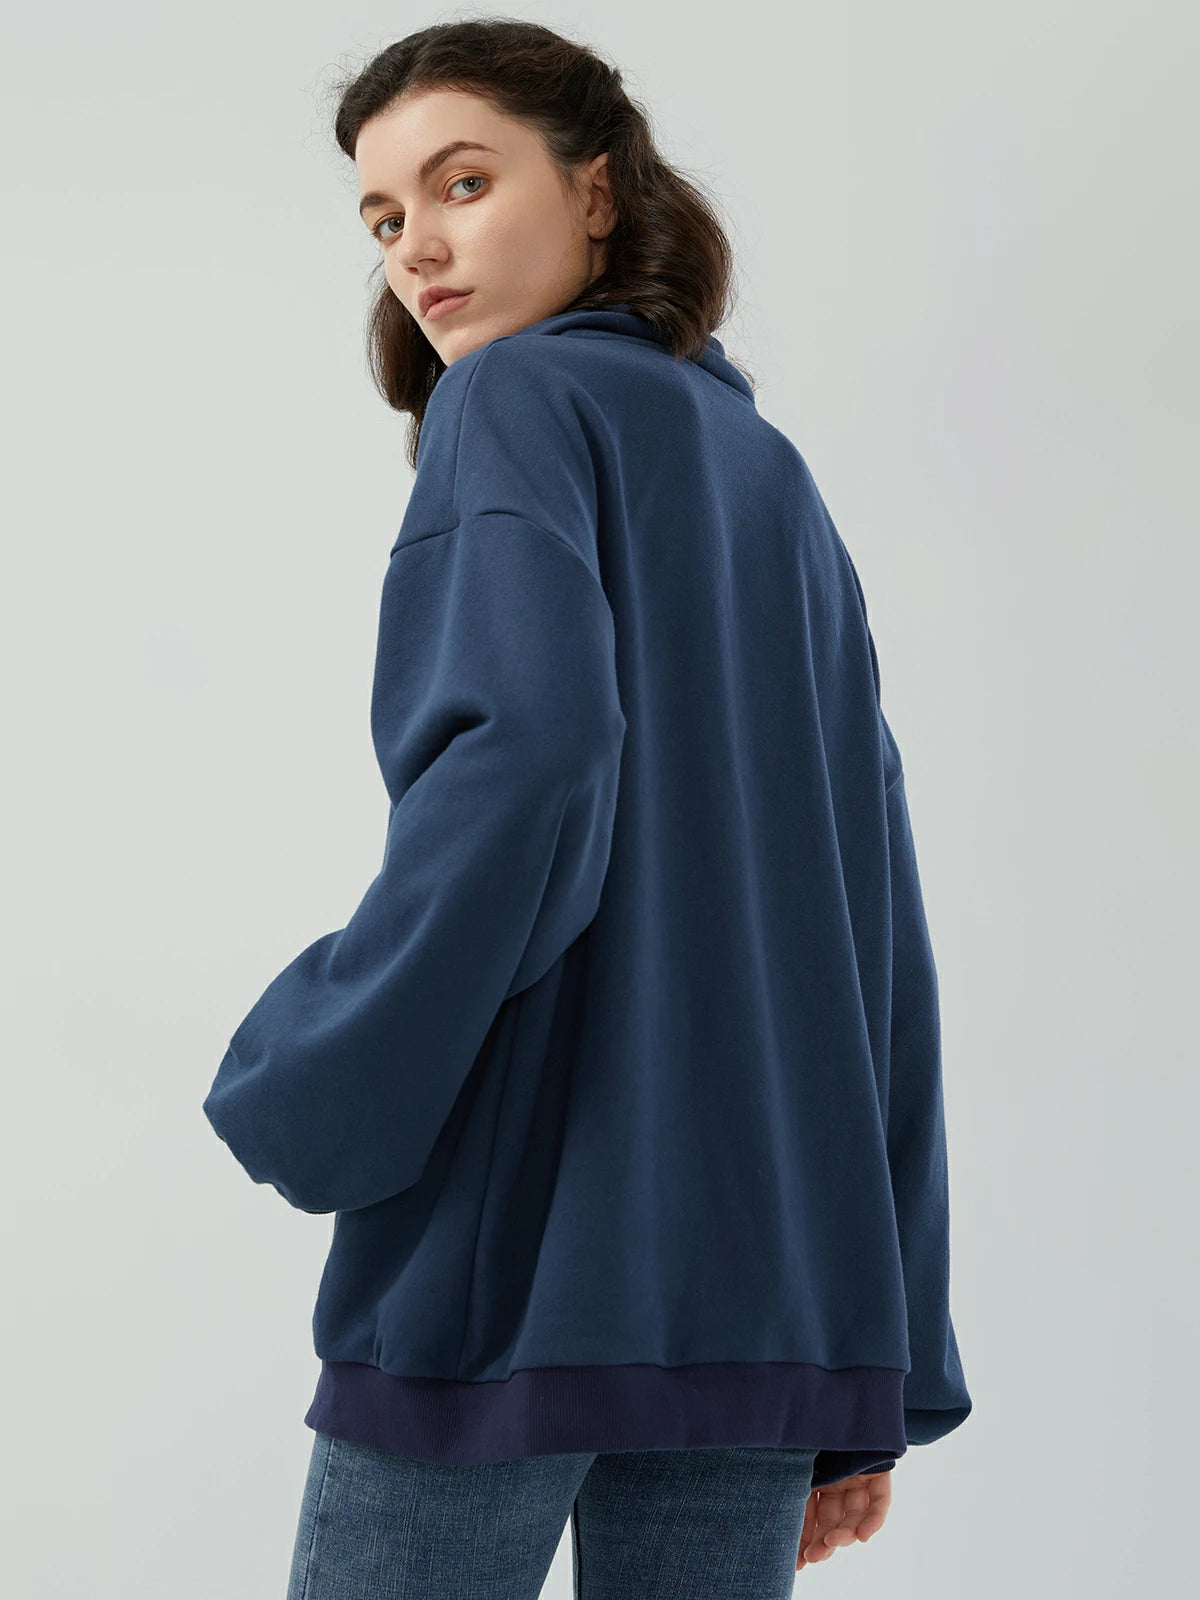 Leisurewear with a fold-over collar, providing both style and comfort